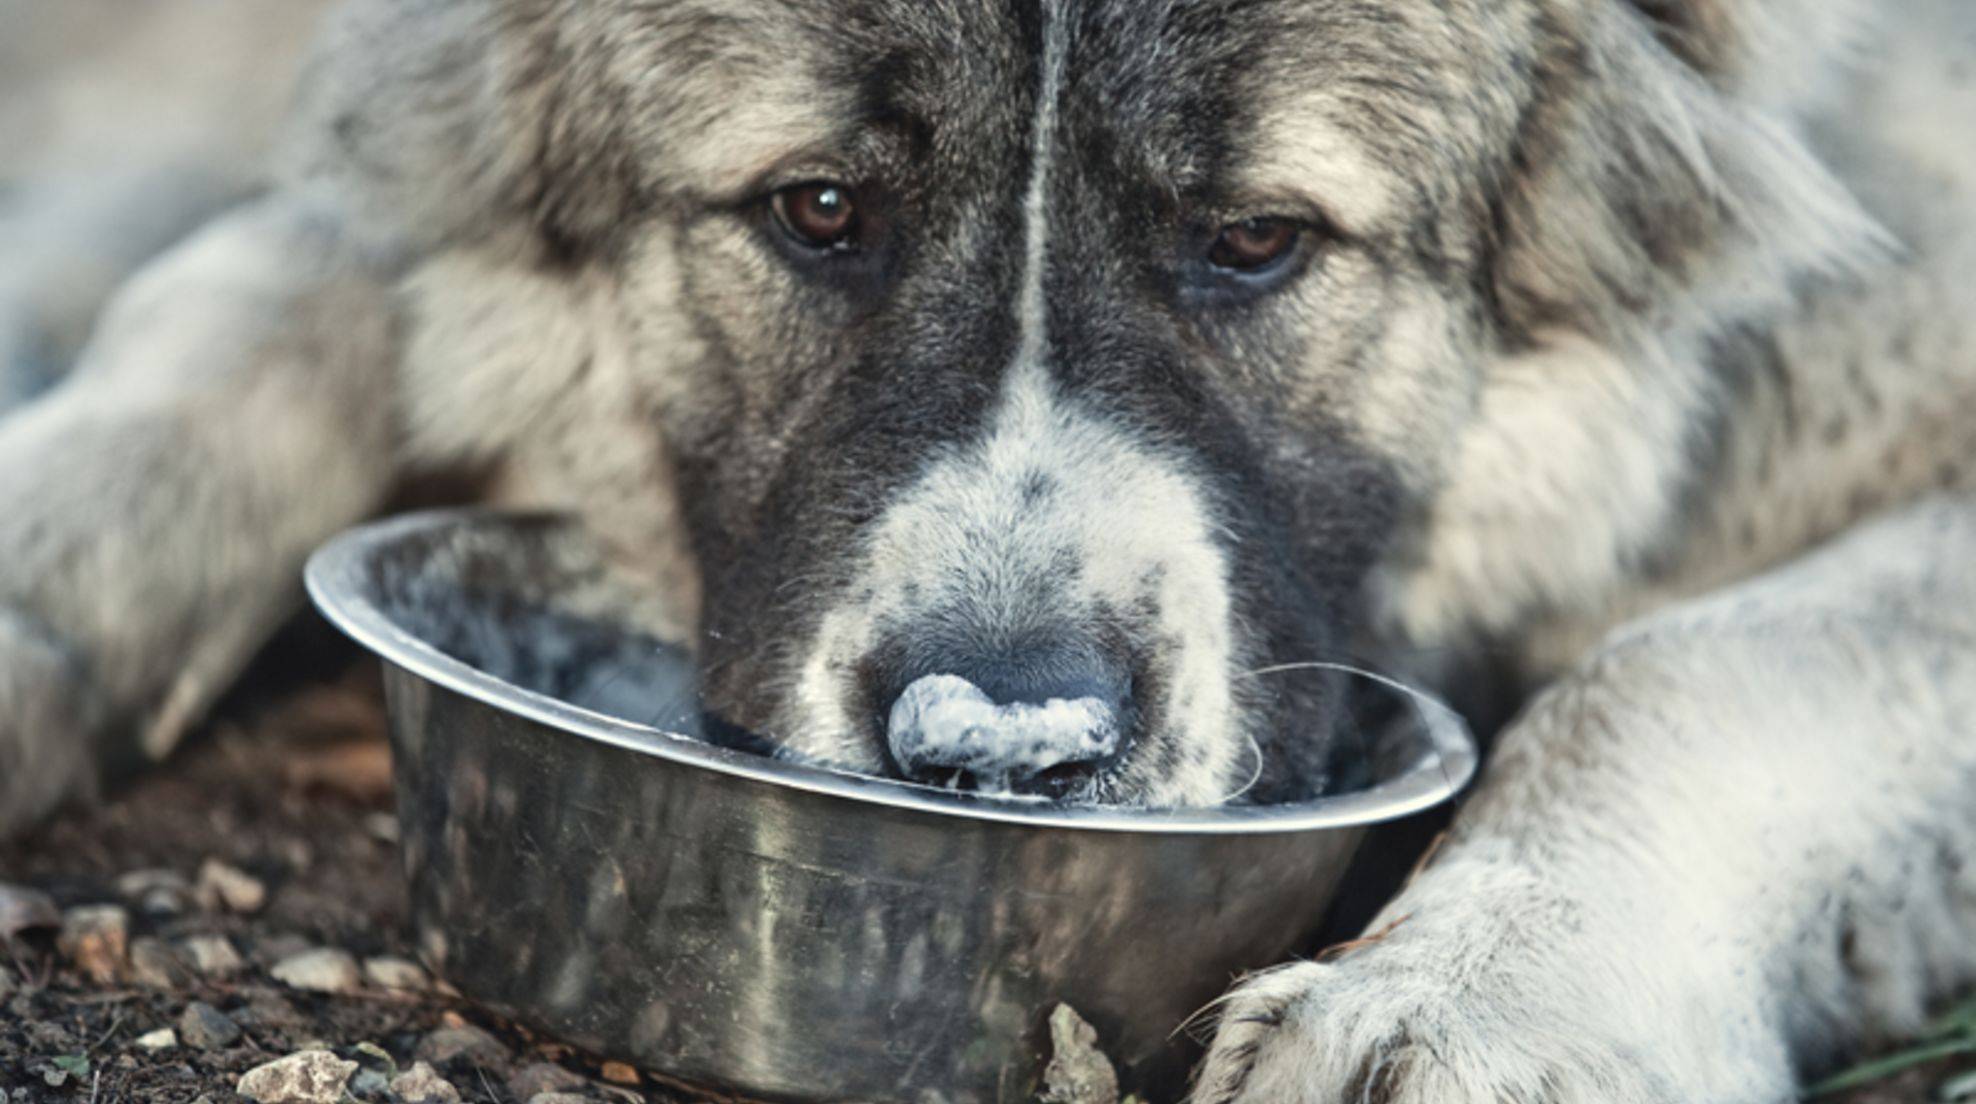 Barfen or wet food? Which is healthier for dogs?